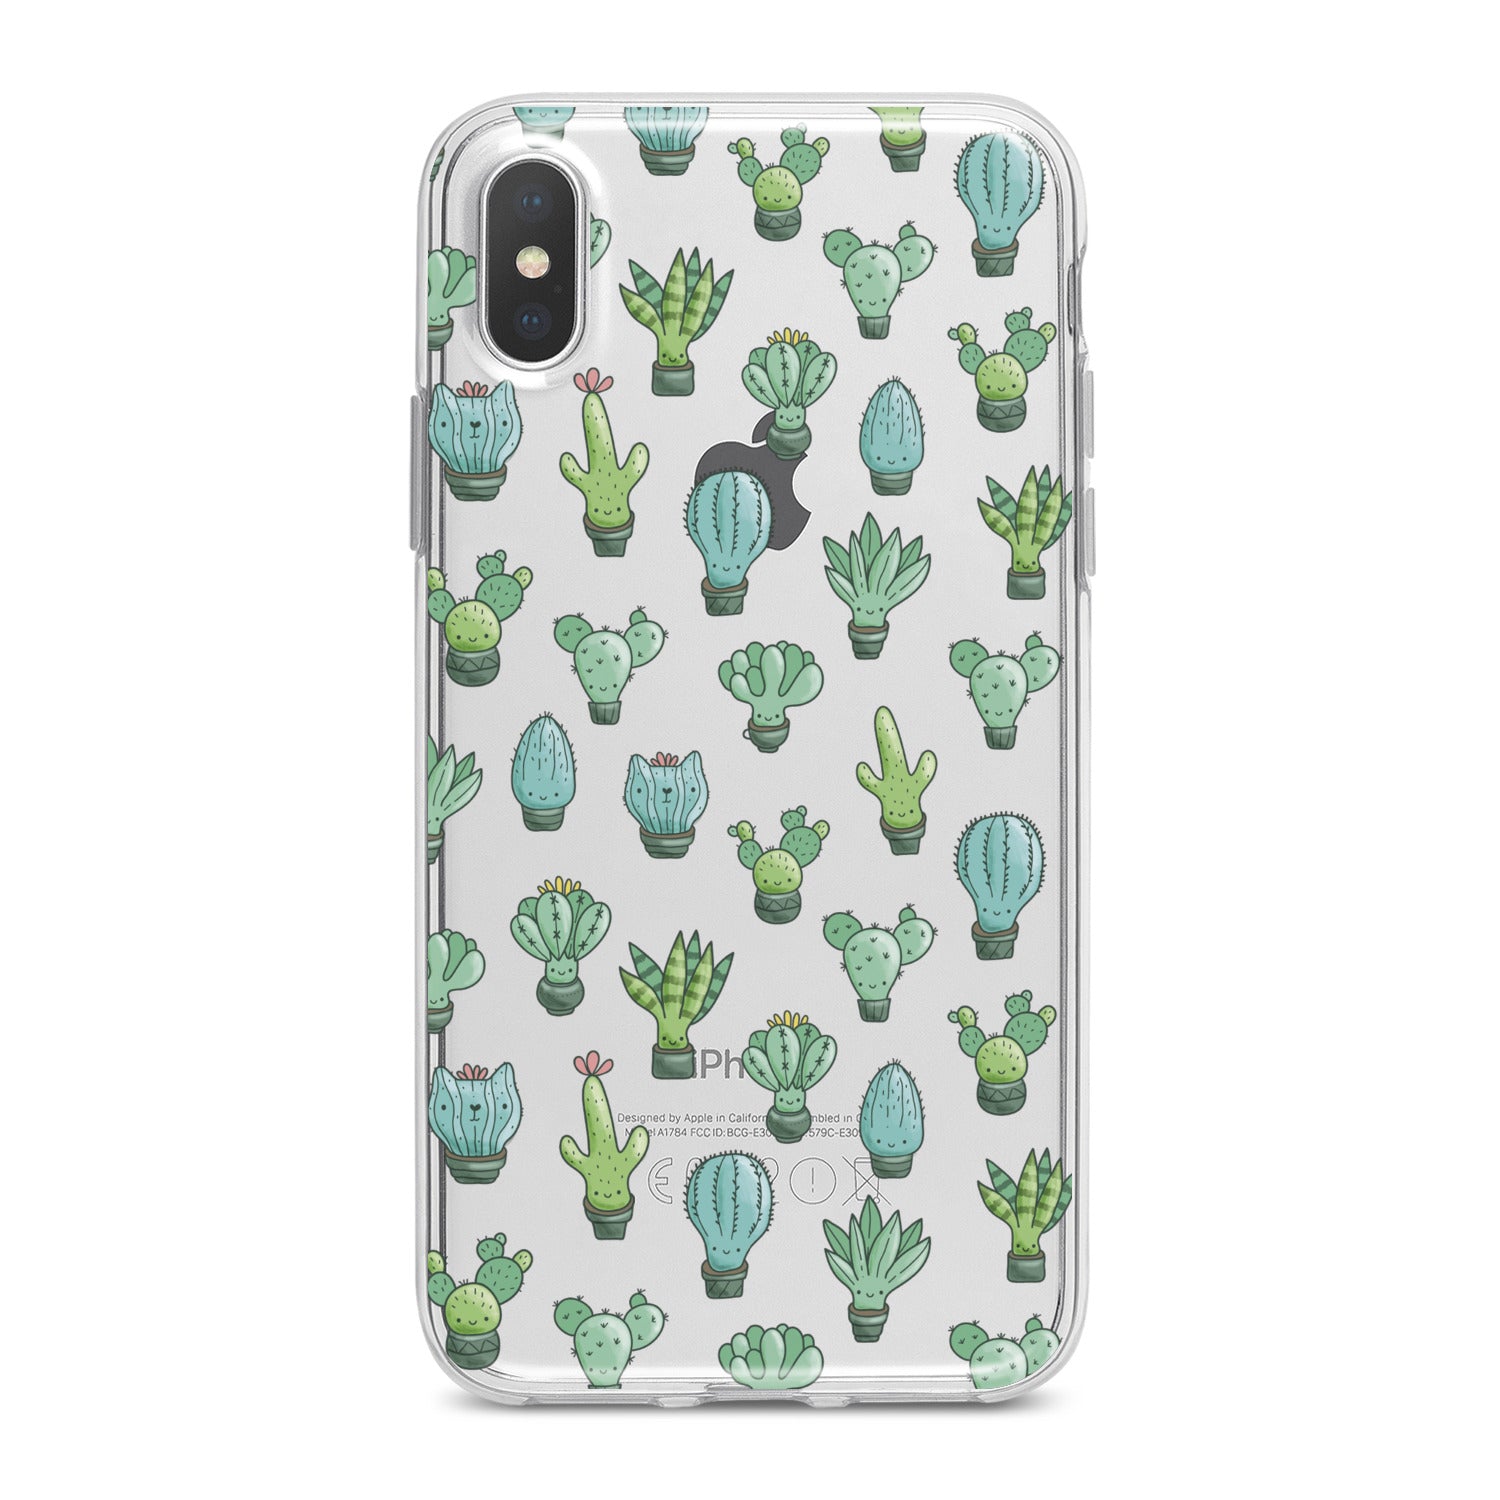 Lex Altern Cute Cactus Patern Phone Case for your iPhone & Android phone.